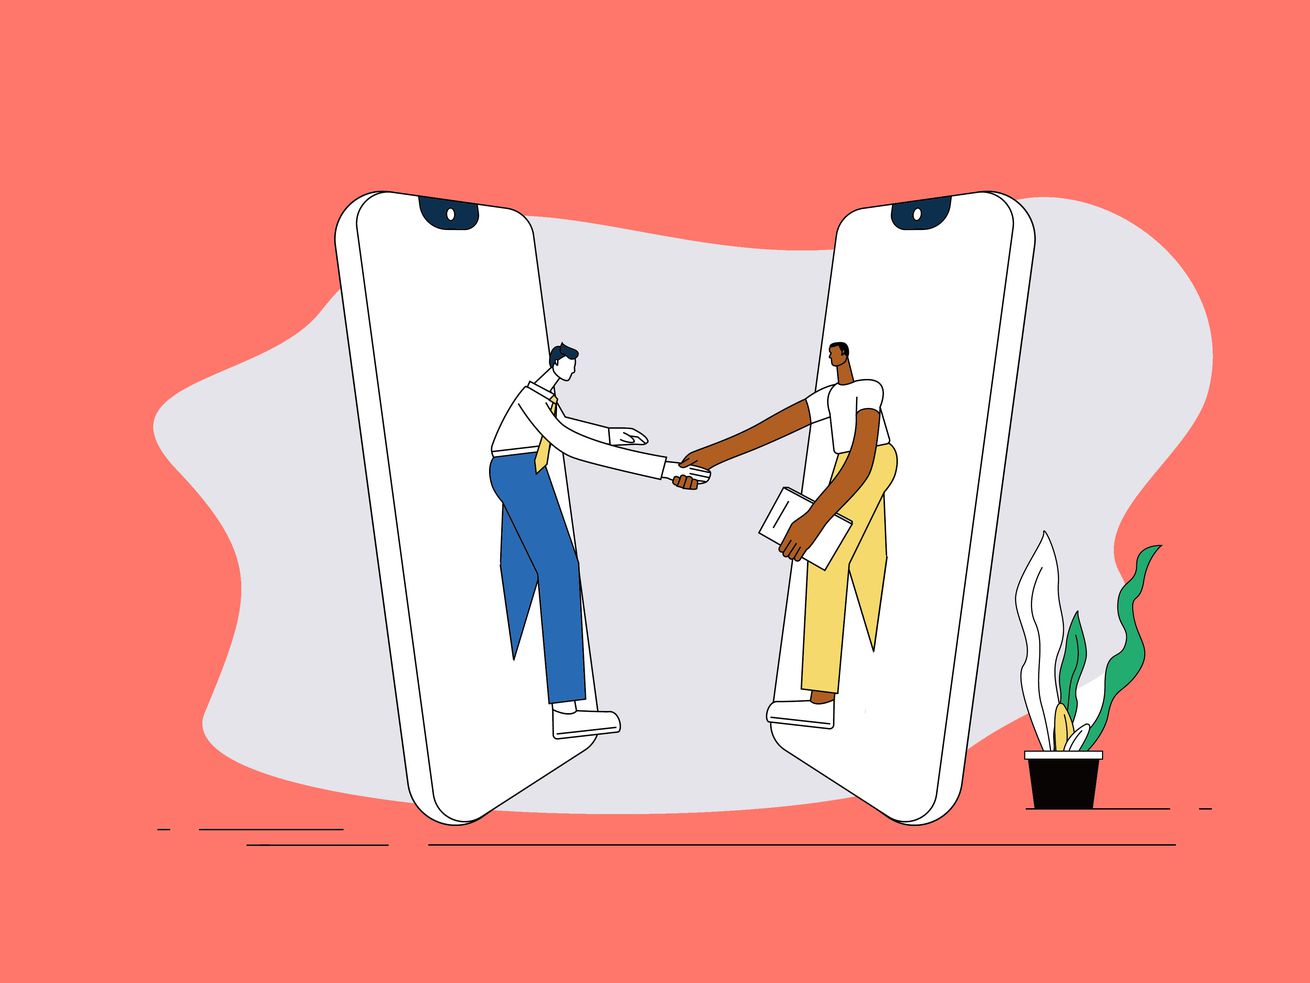 Illustration of two people stepping out of smartphones and shaking hands.